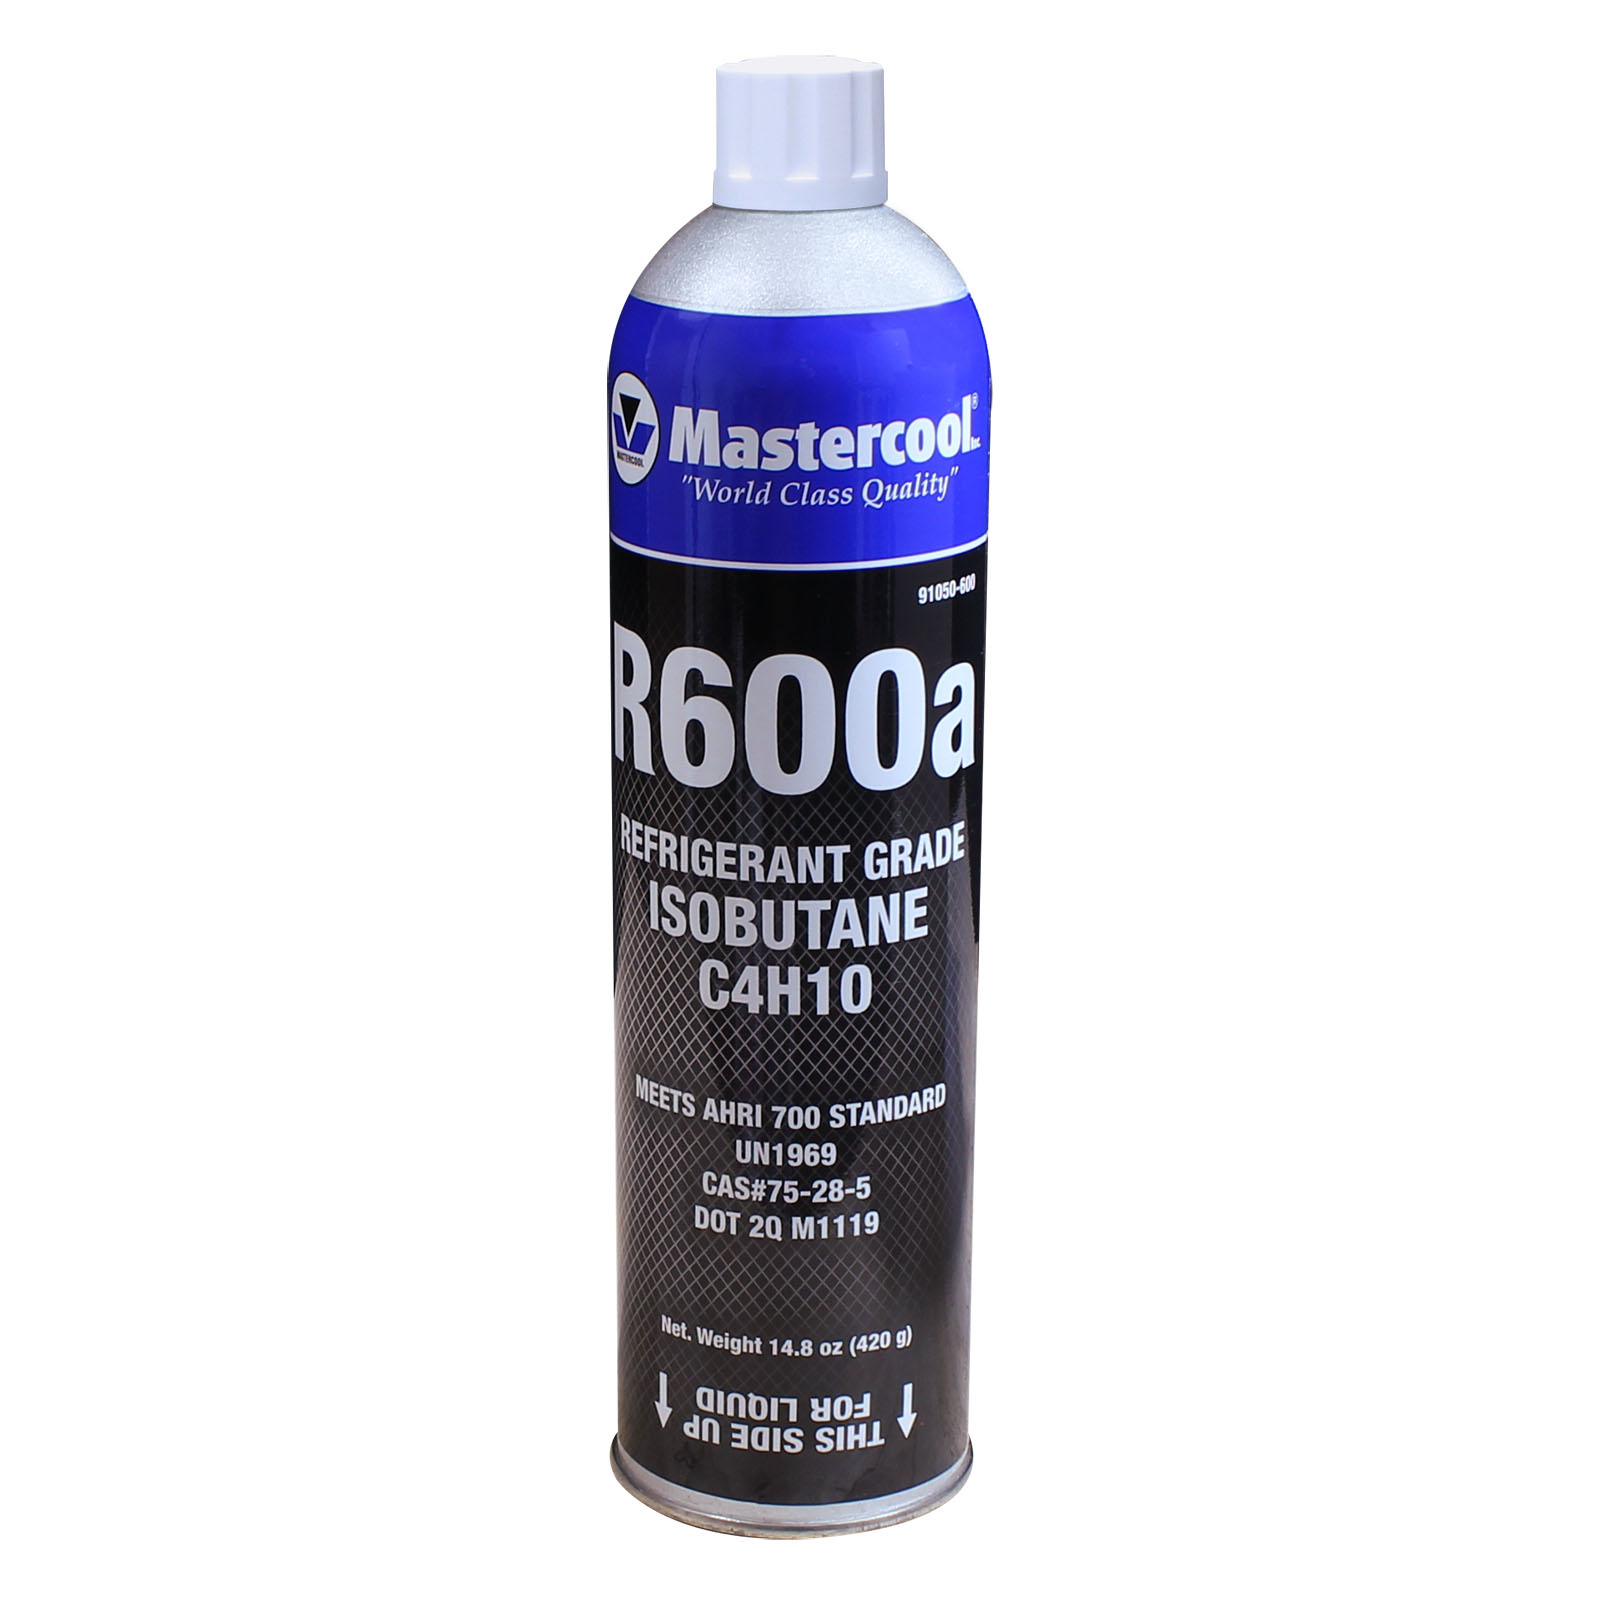 Mastercool Inc., Manufacturer of Air Conditioning, Refrigeration, Service  Tools and Equipment